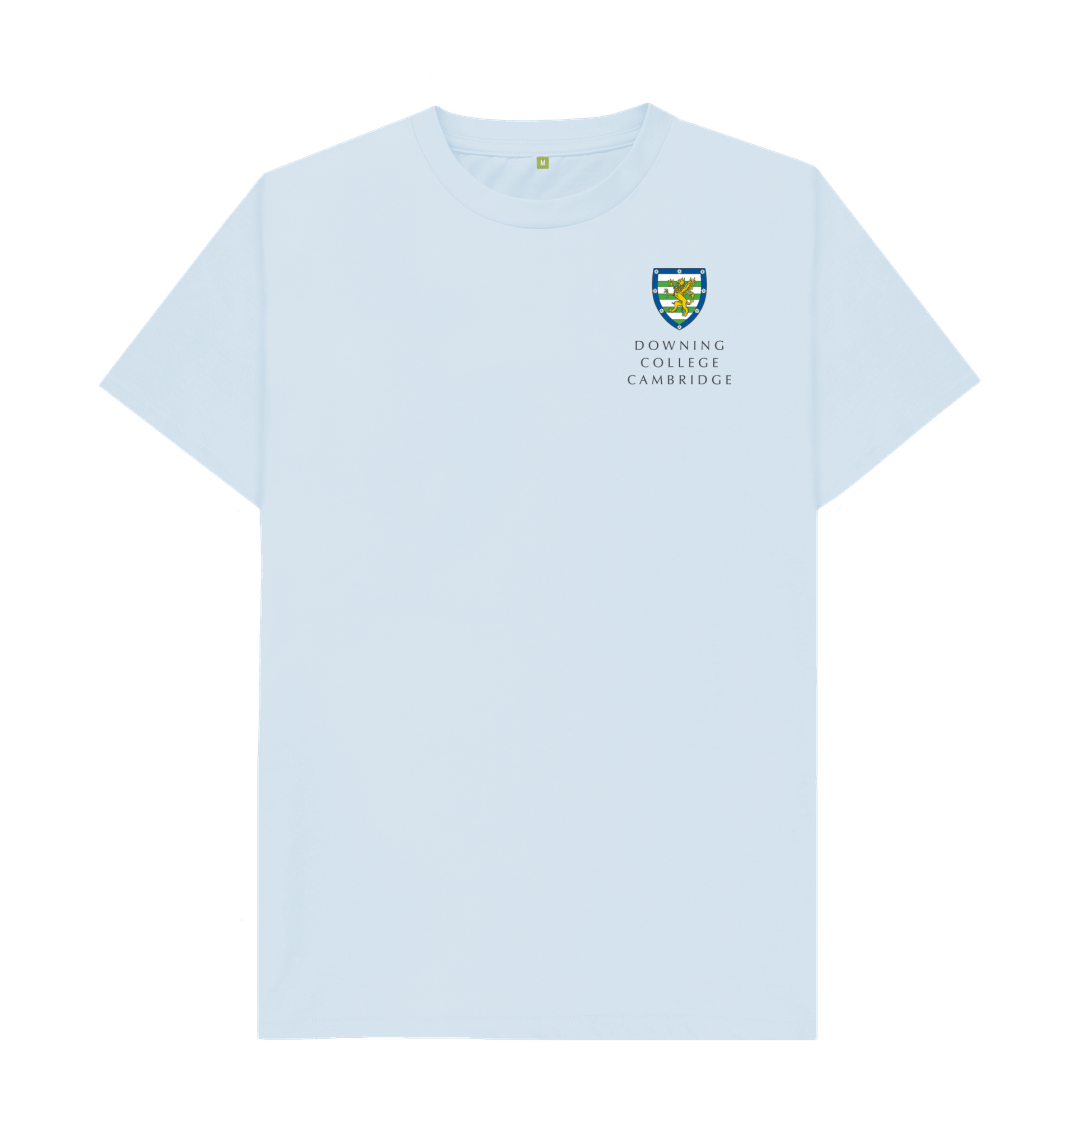 Sky Blue Downing College Crew neck tee - light colours